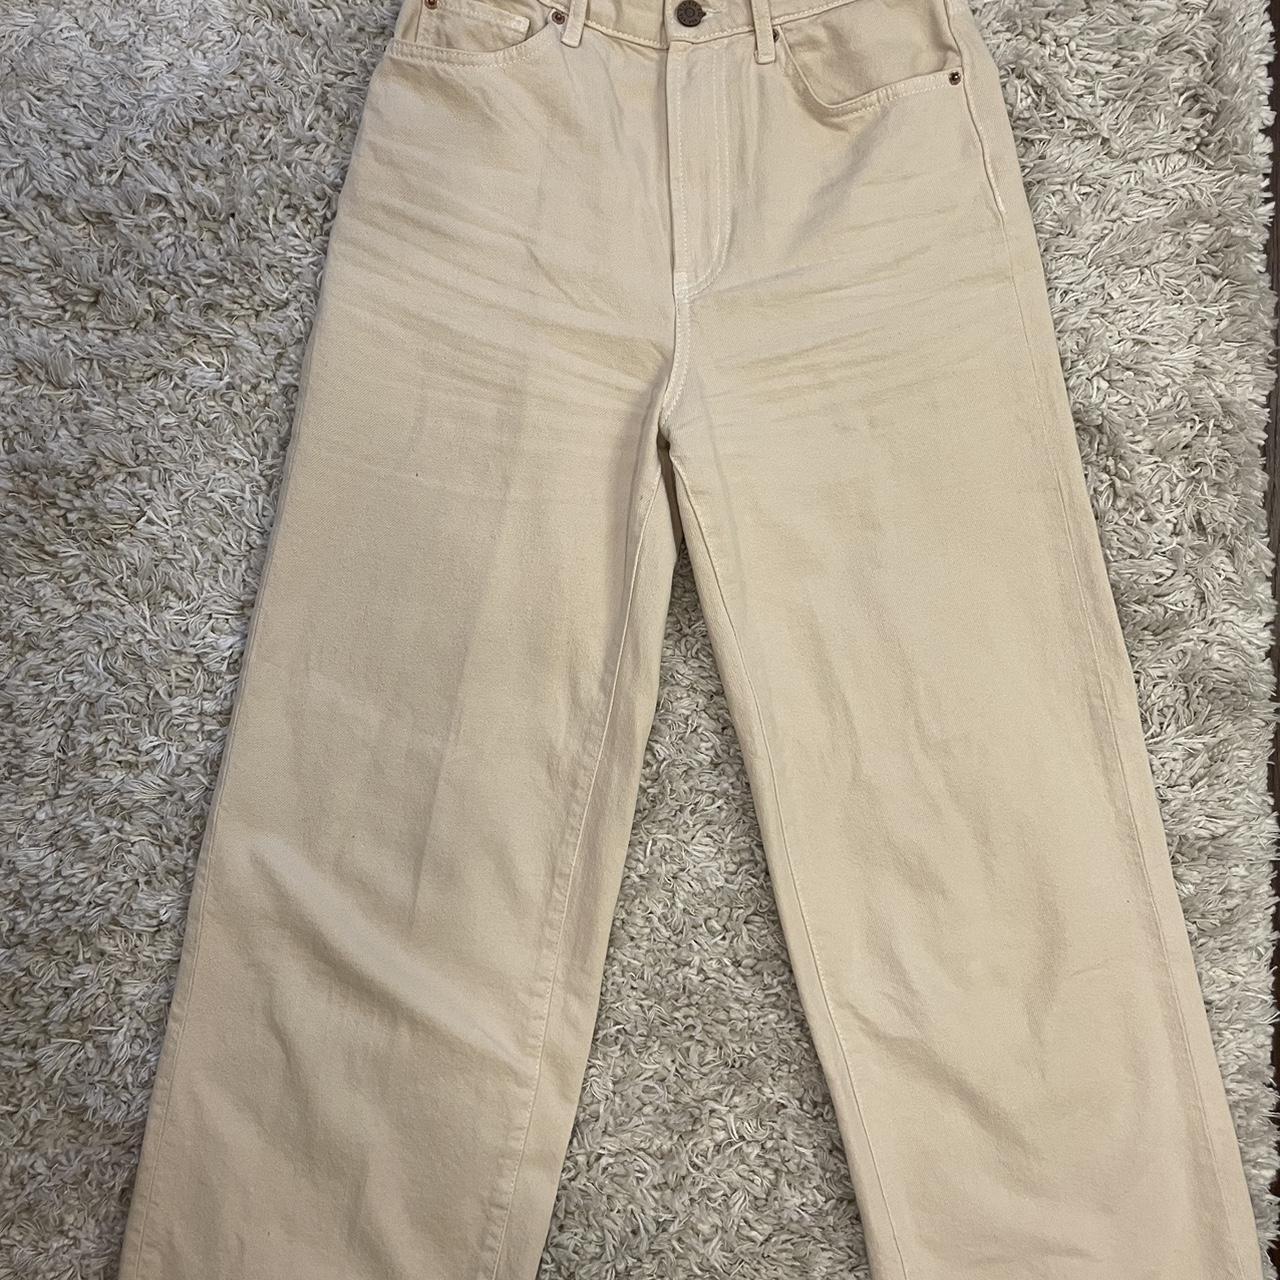 Trousers With Matching Belt Casual Formal Office Pants For Ladies - Cream -  Wholesale Womens Clothing Vendors For Boutiques